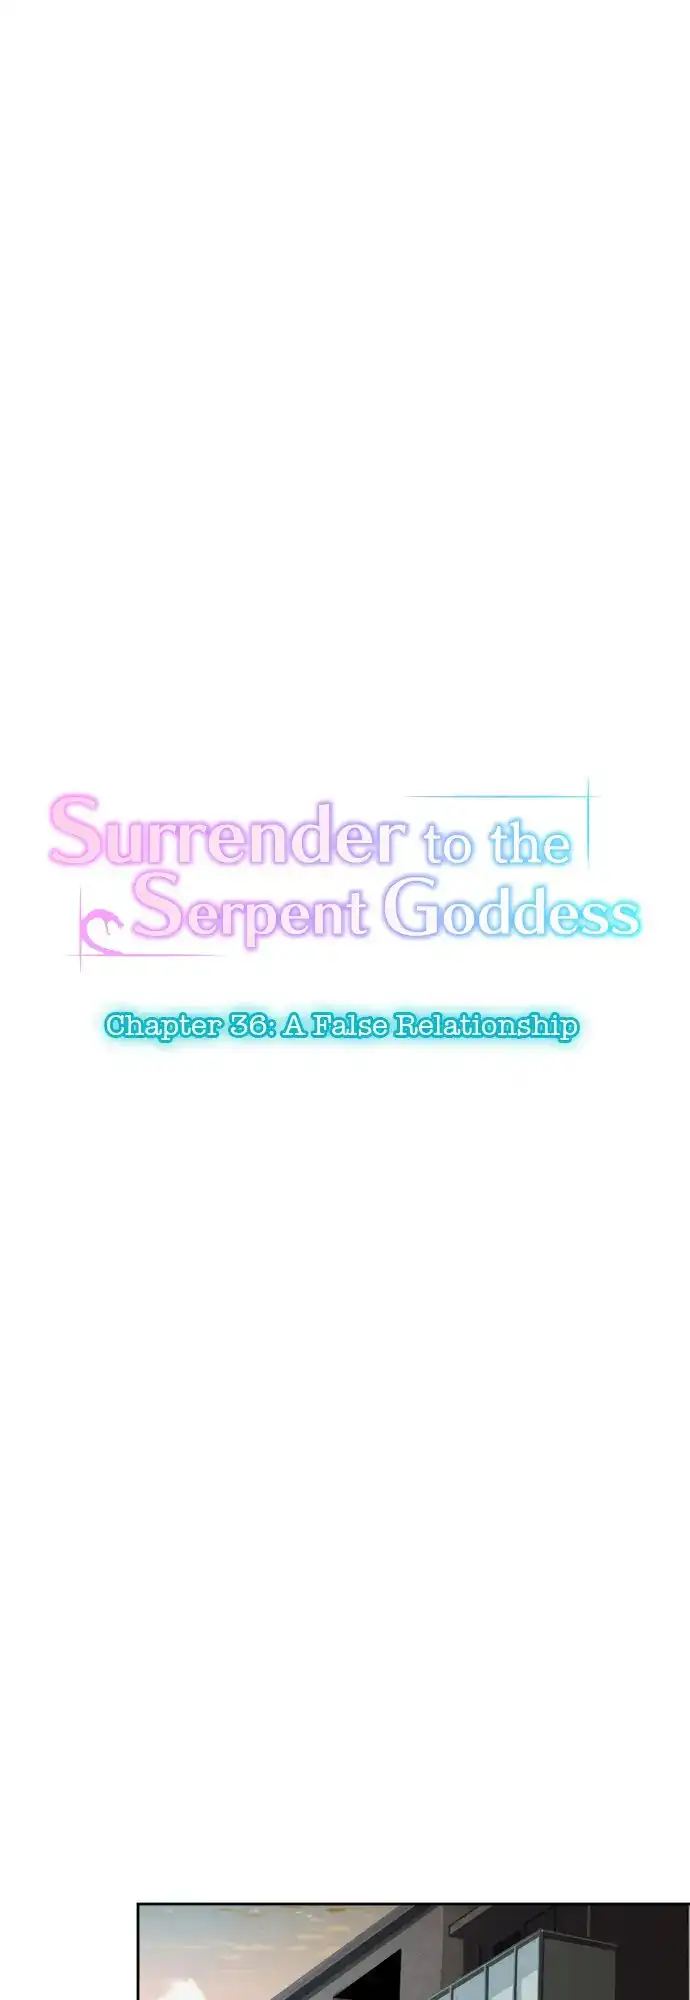 Surrender to the Serpent Goddess chapter 36 - page 1